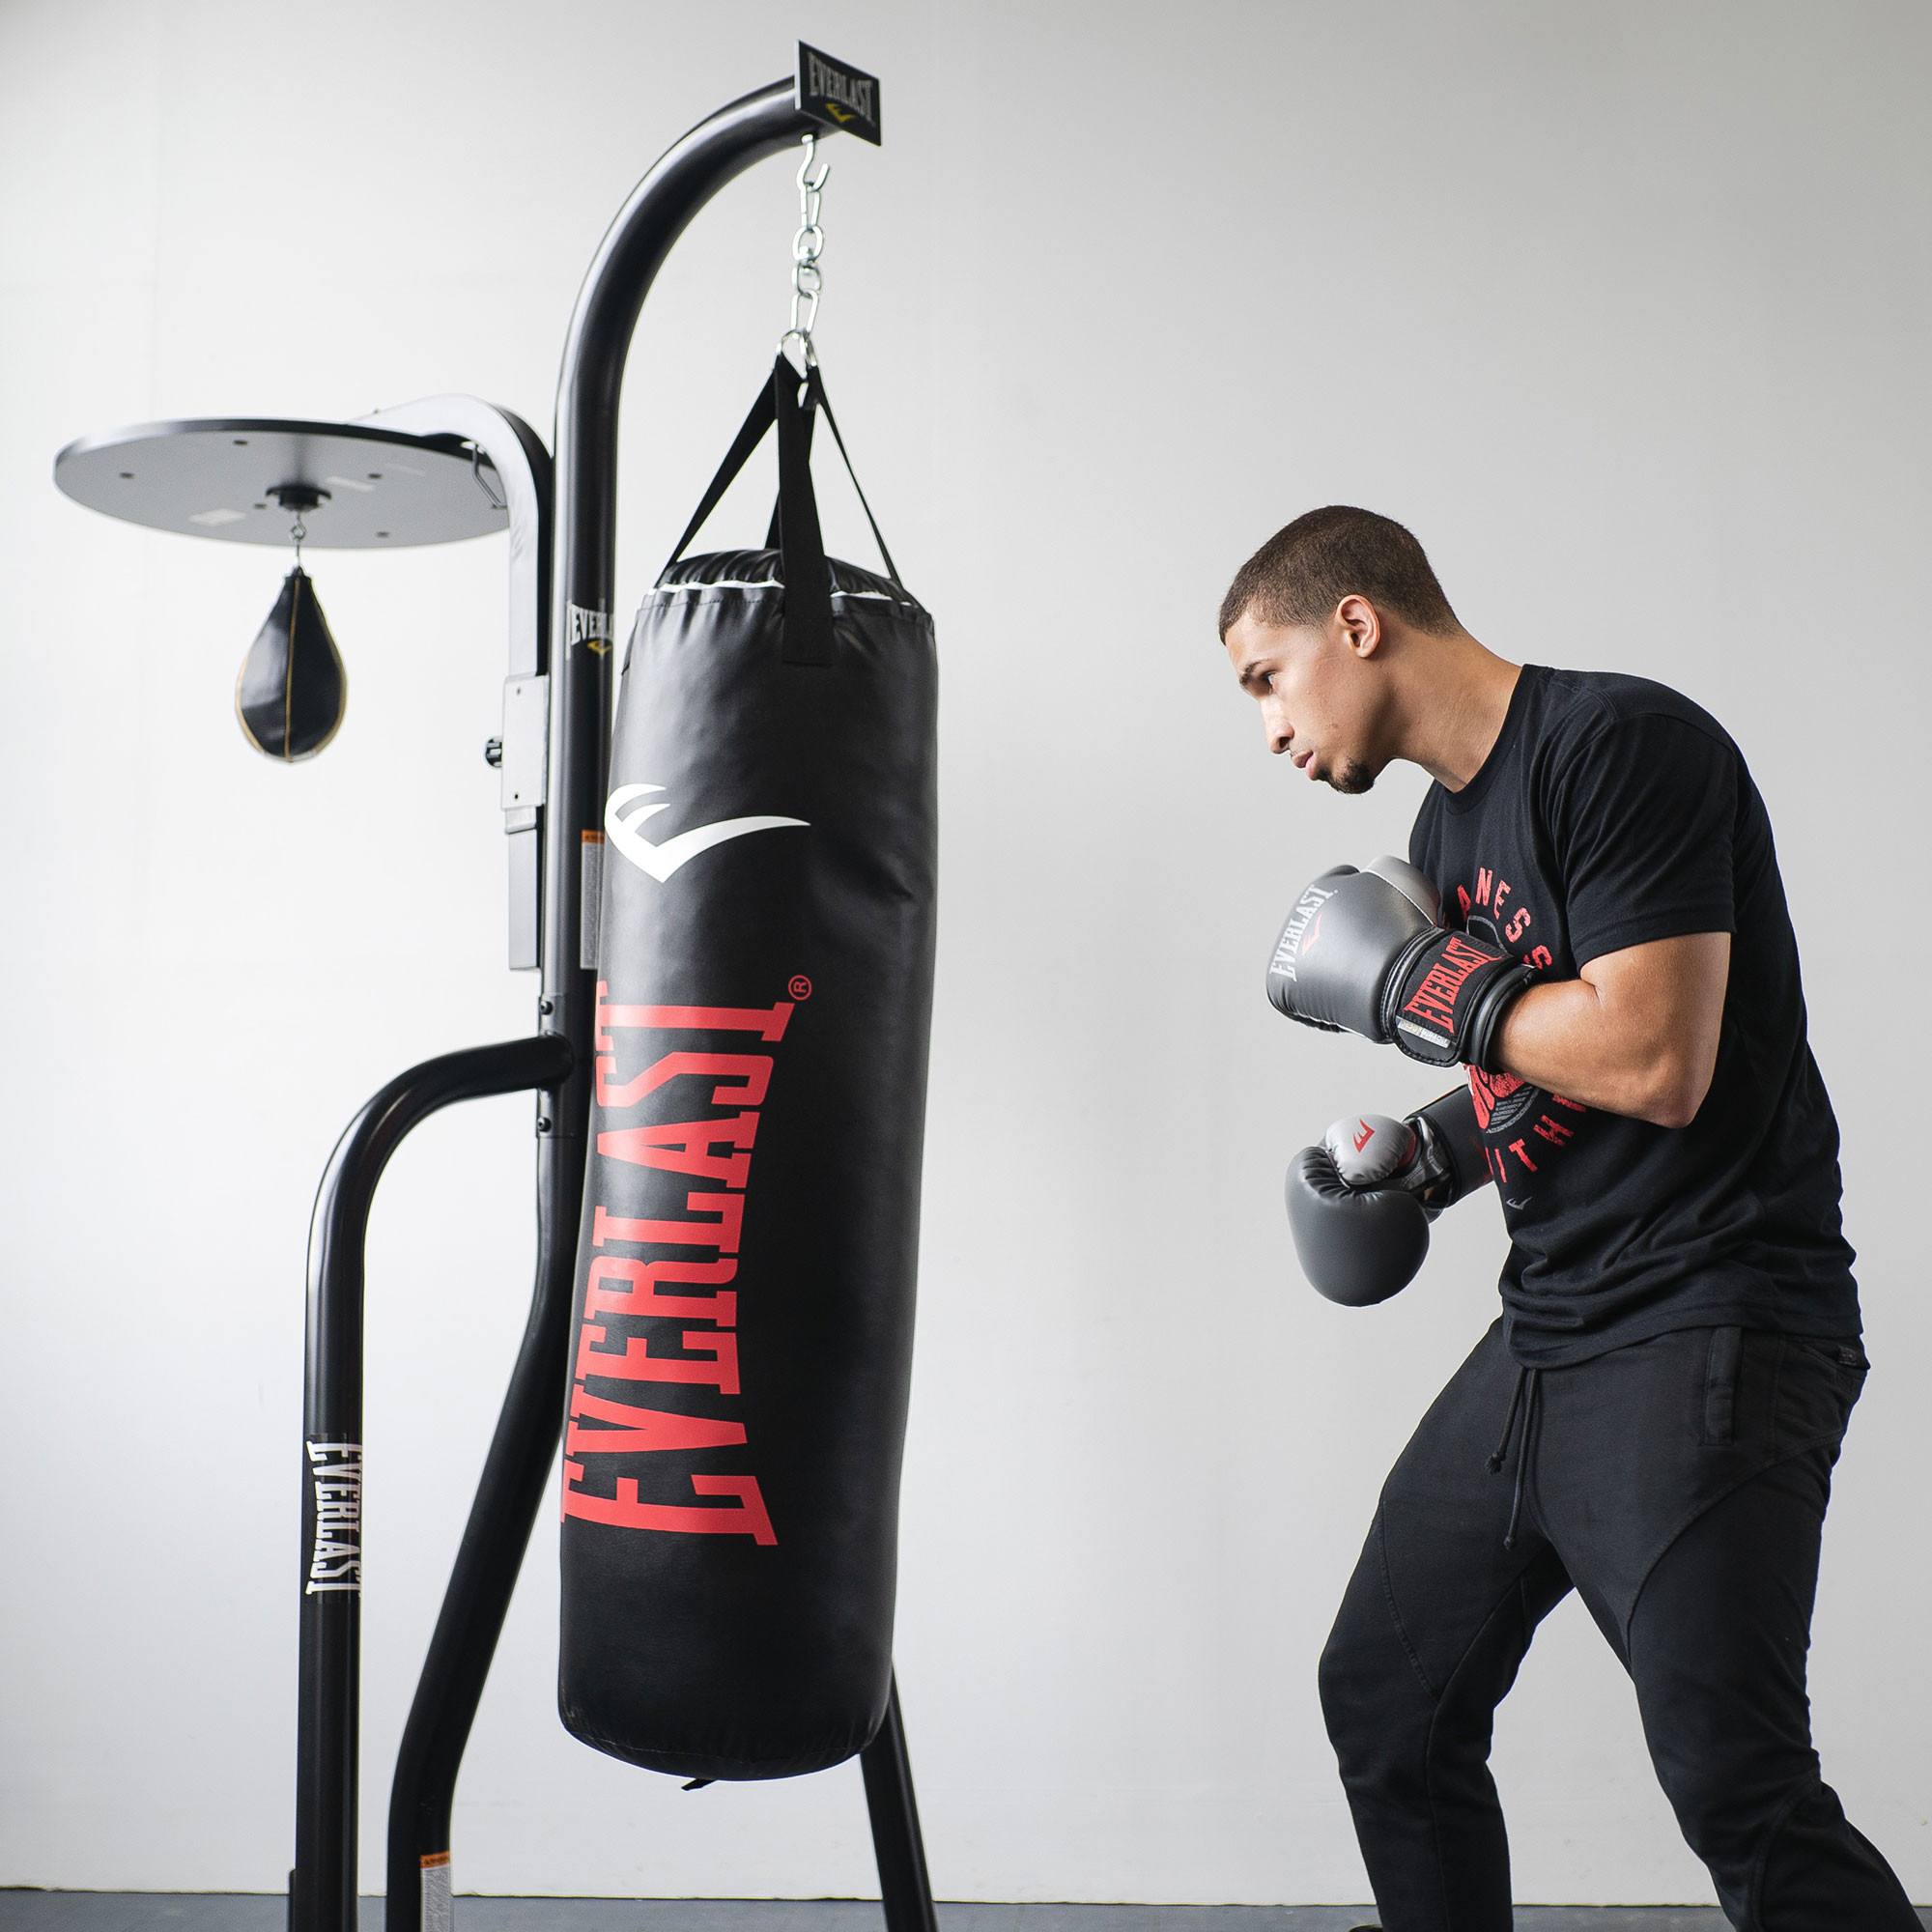 Everlast 2 Station Dual Heavy Duty Powder Coated Steel Heavy and Speed Bag Stand - image 2 of 4